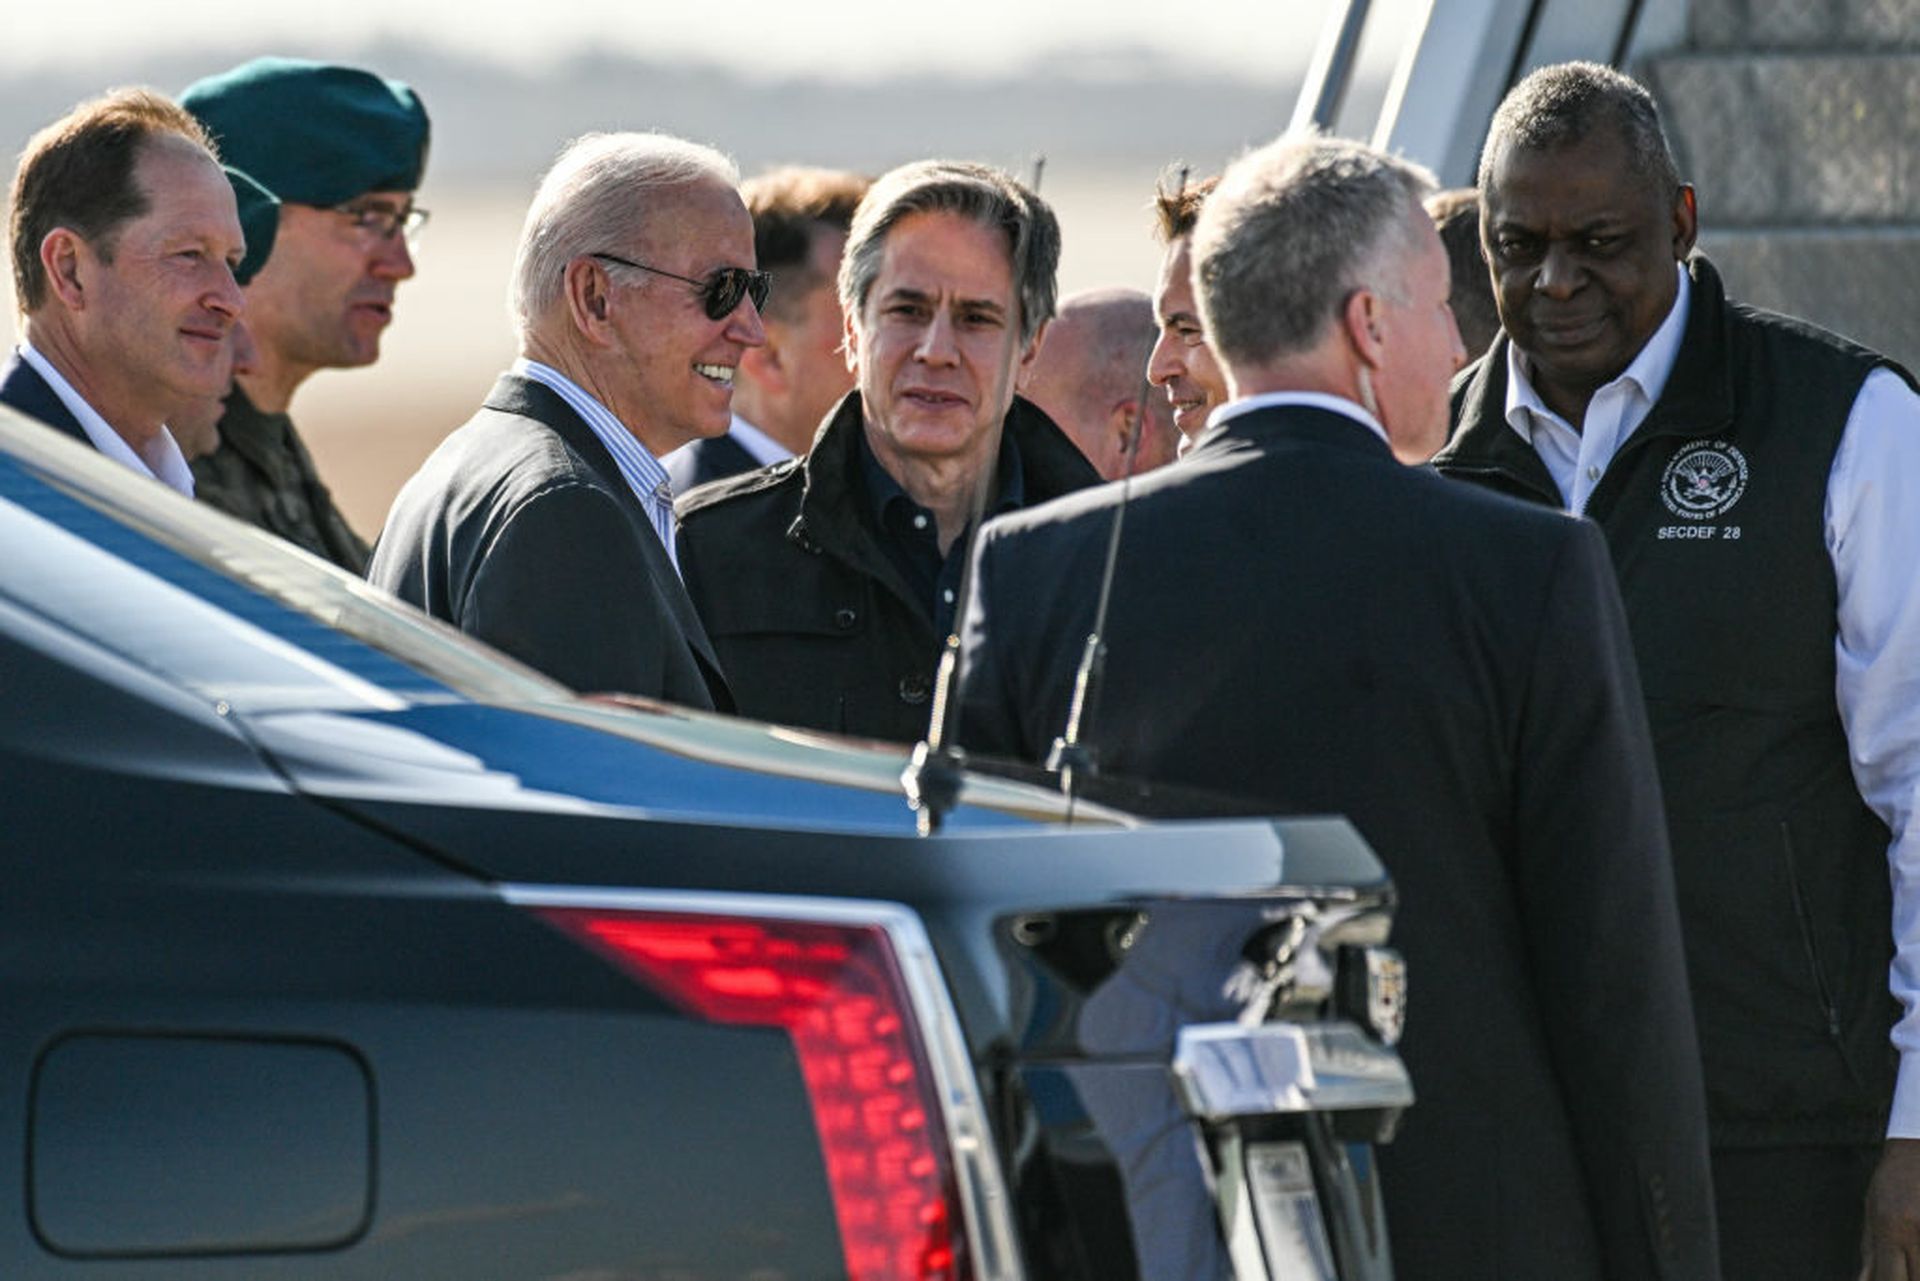 President Joe Biden, center left, Secretary of State Antony Blinken, center, and Defense Secretary Lloyd Austin, right, disembark Air Force One at Rzeszow Airport on March 25, 2022, in Rzeszow, Poland. The State Department&#8217;s new cyber bureau began operations this week, giving Blinken an office dedicated to a range of digital security and poli...